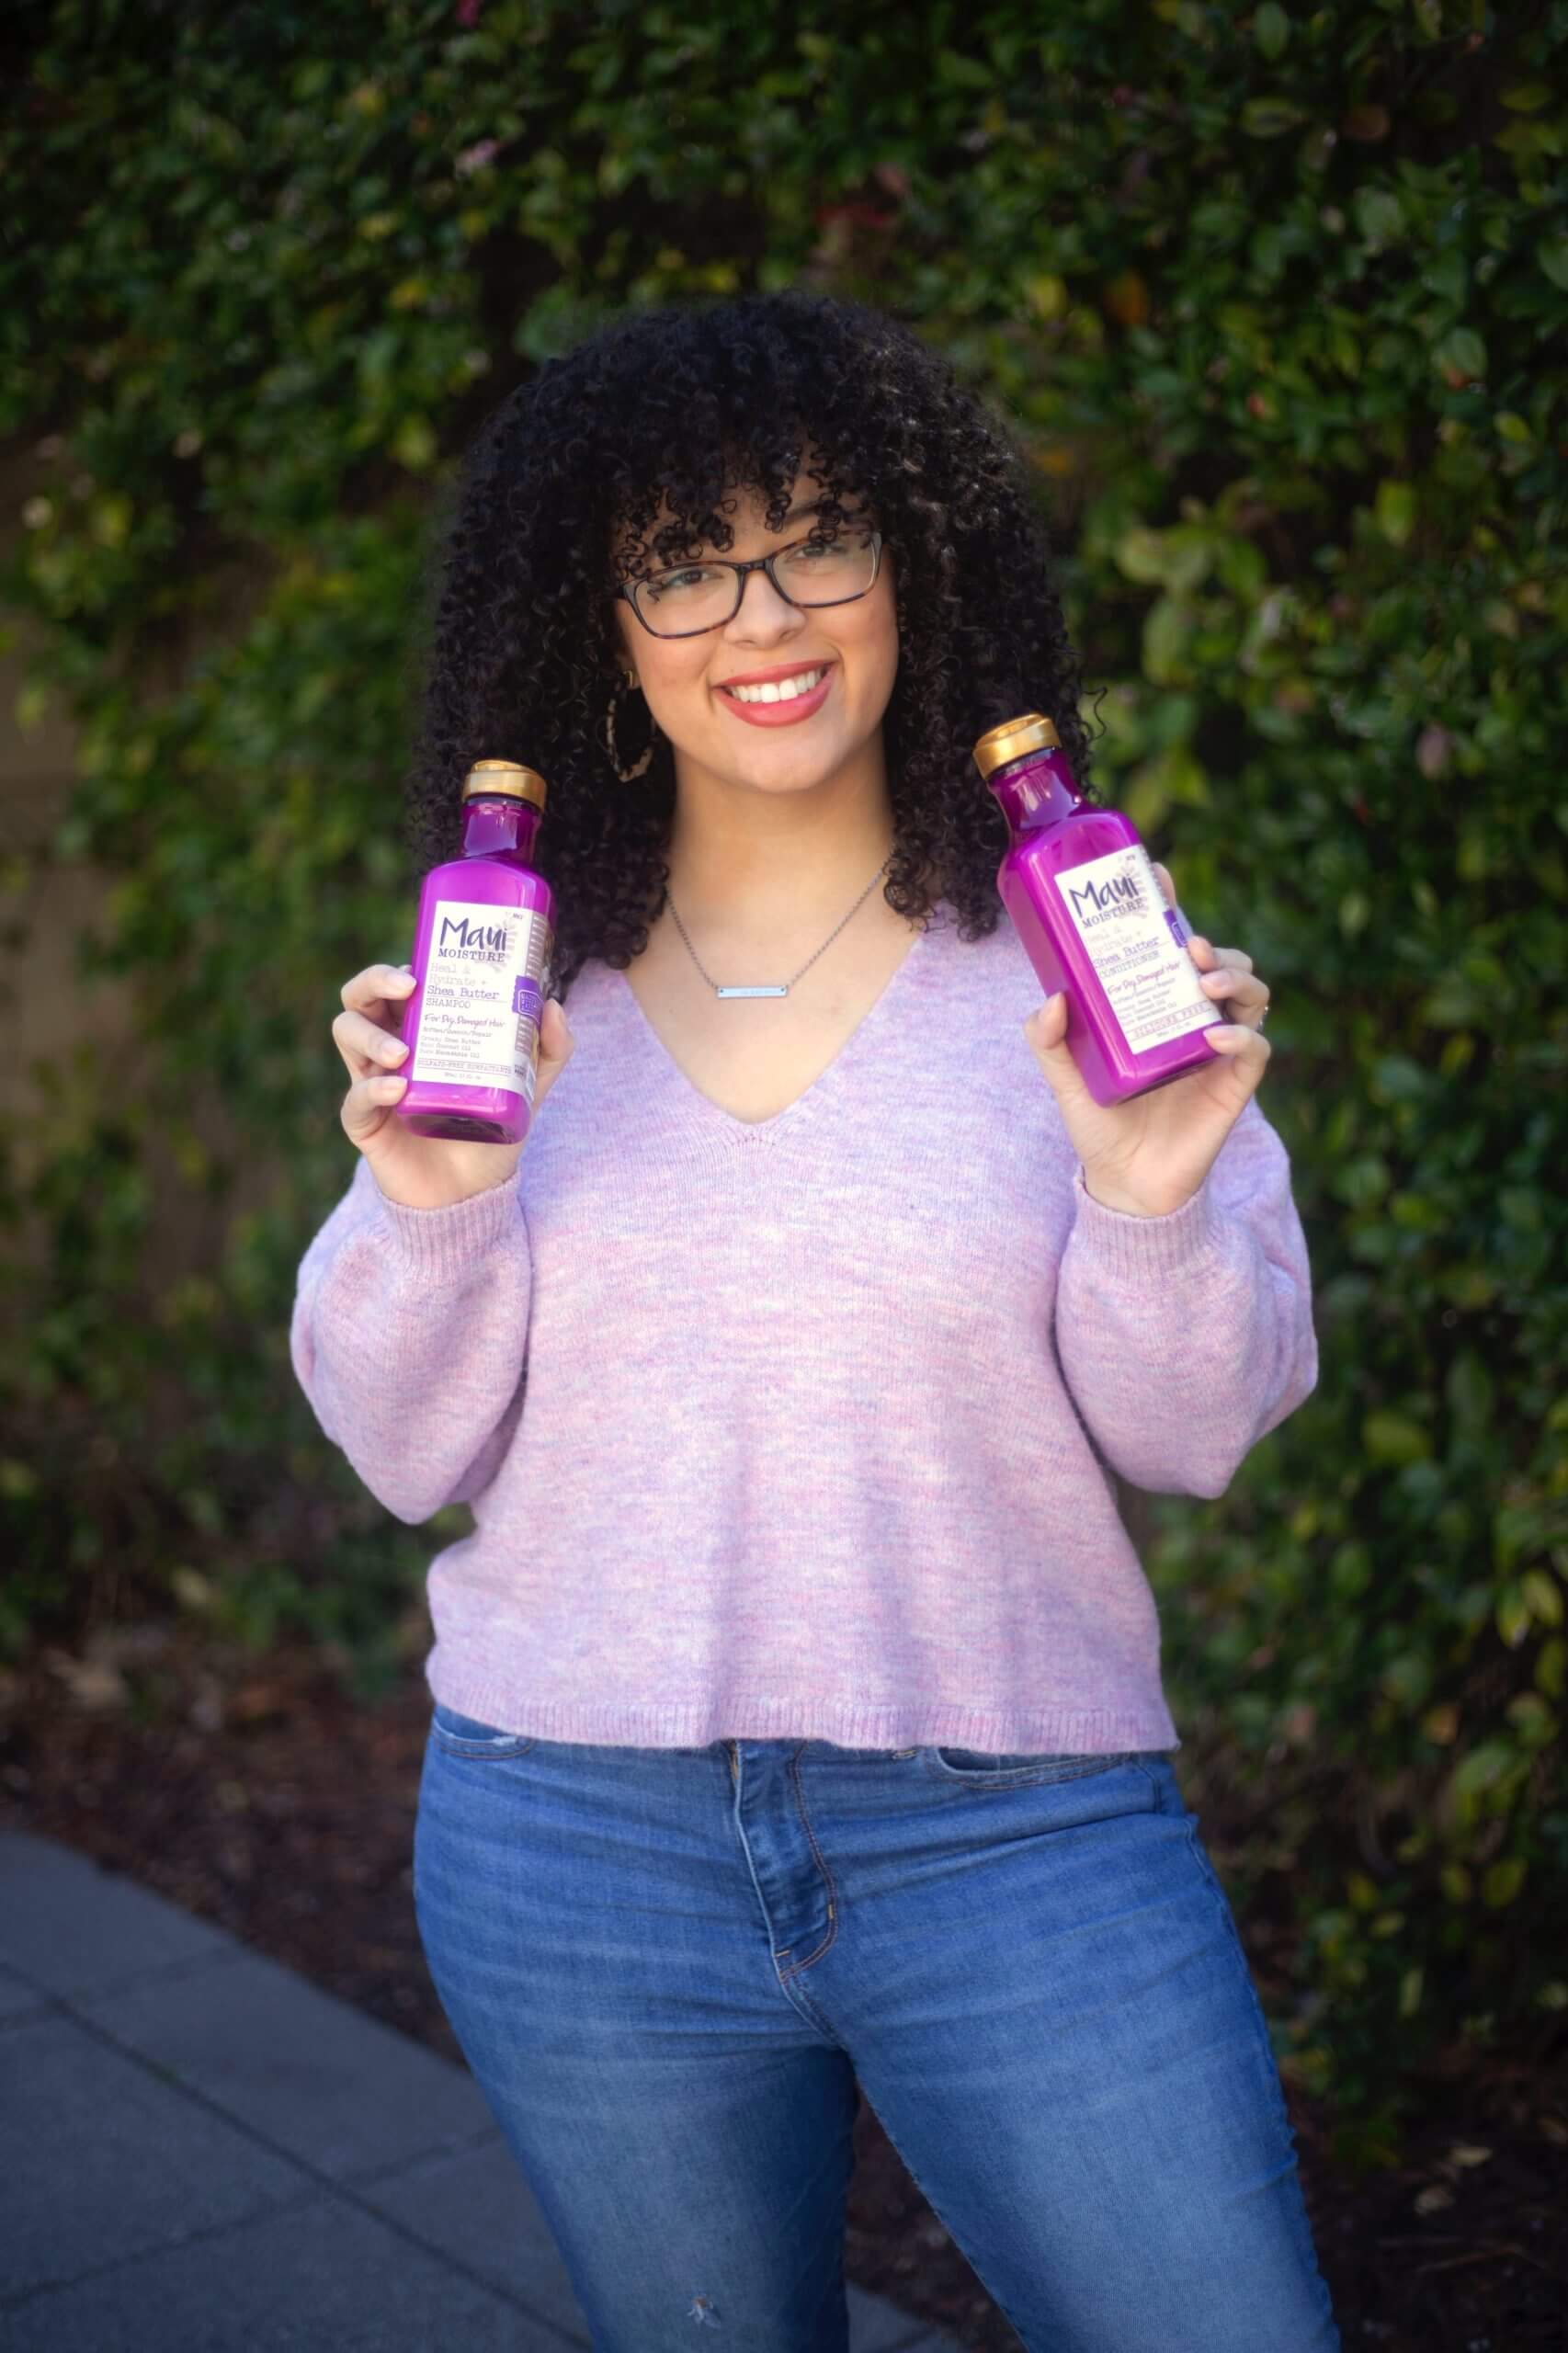 In today’s blog post, I’m sharing the true story about how I feel in love with my curly hair as well as my curly hair routine to help anyone in their natural journey. #AD Maui Moisture curly hair products are a go-to for me!